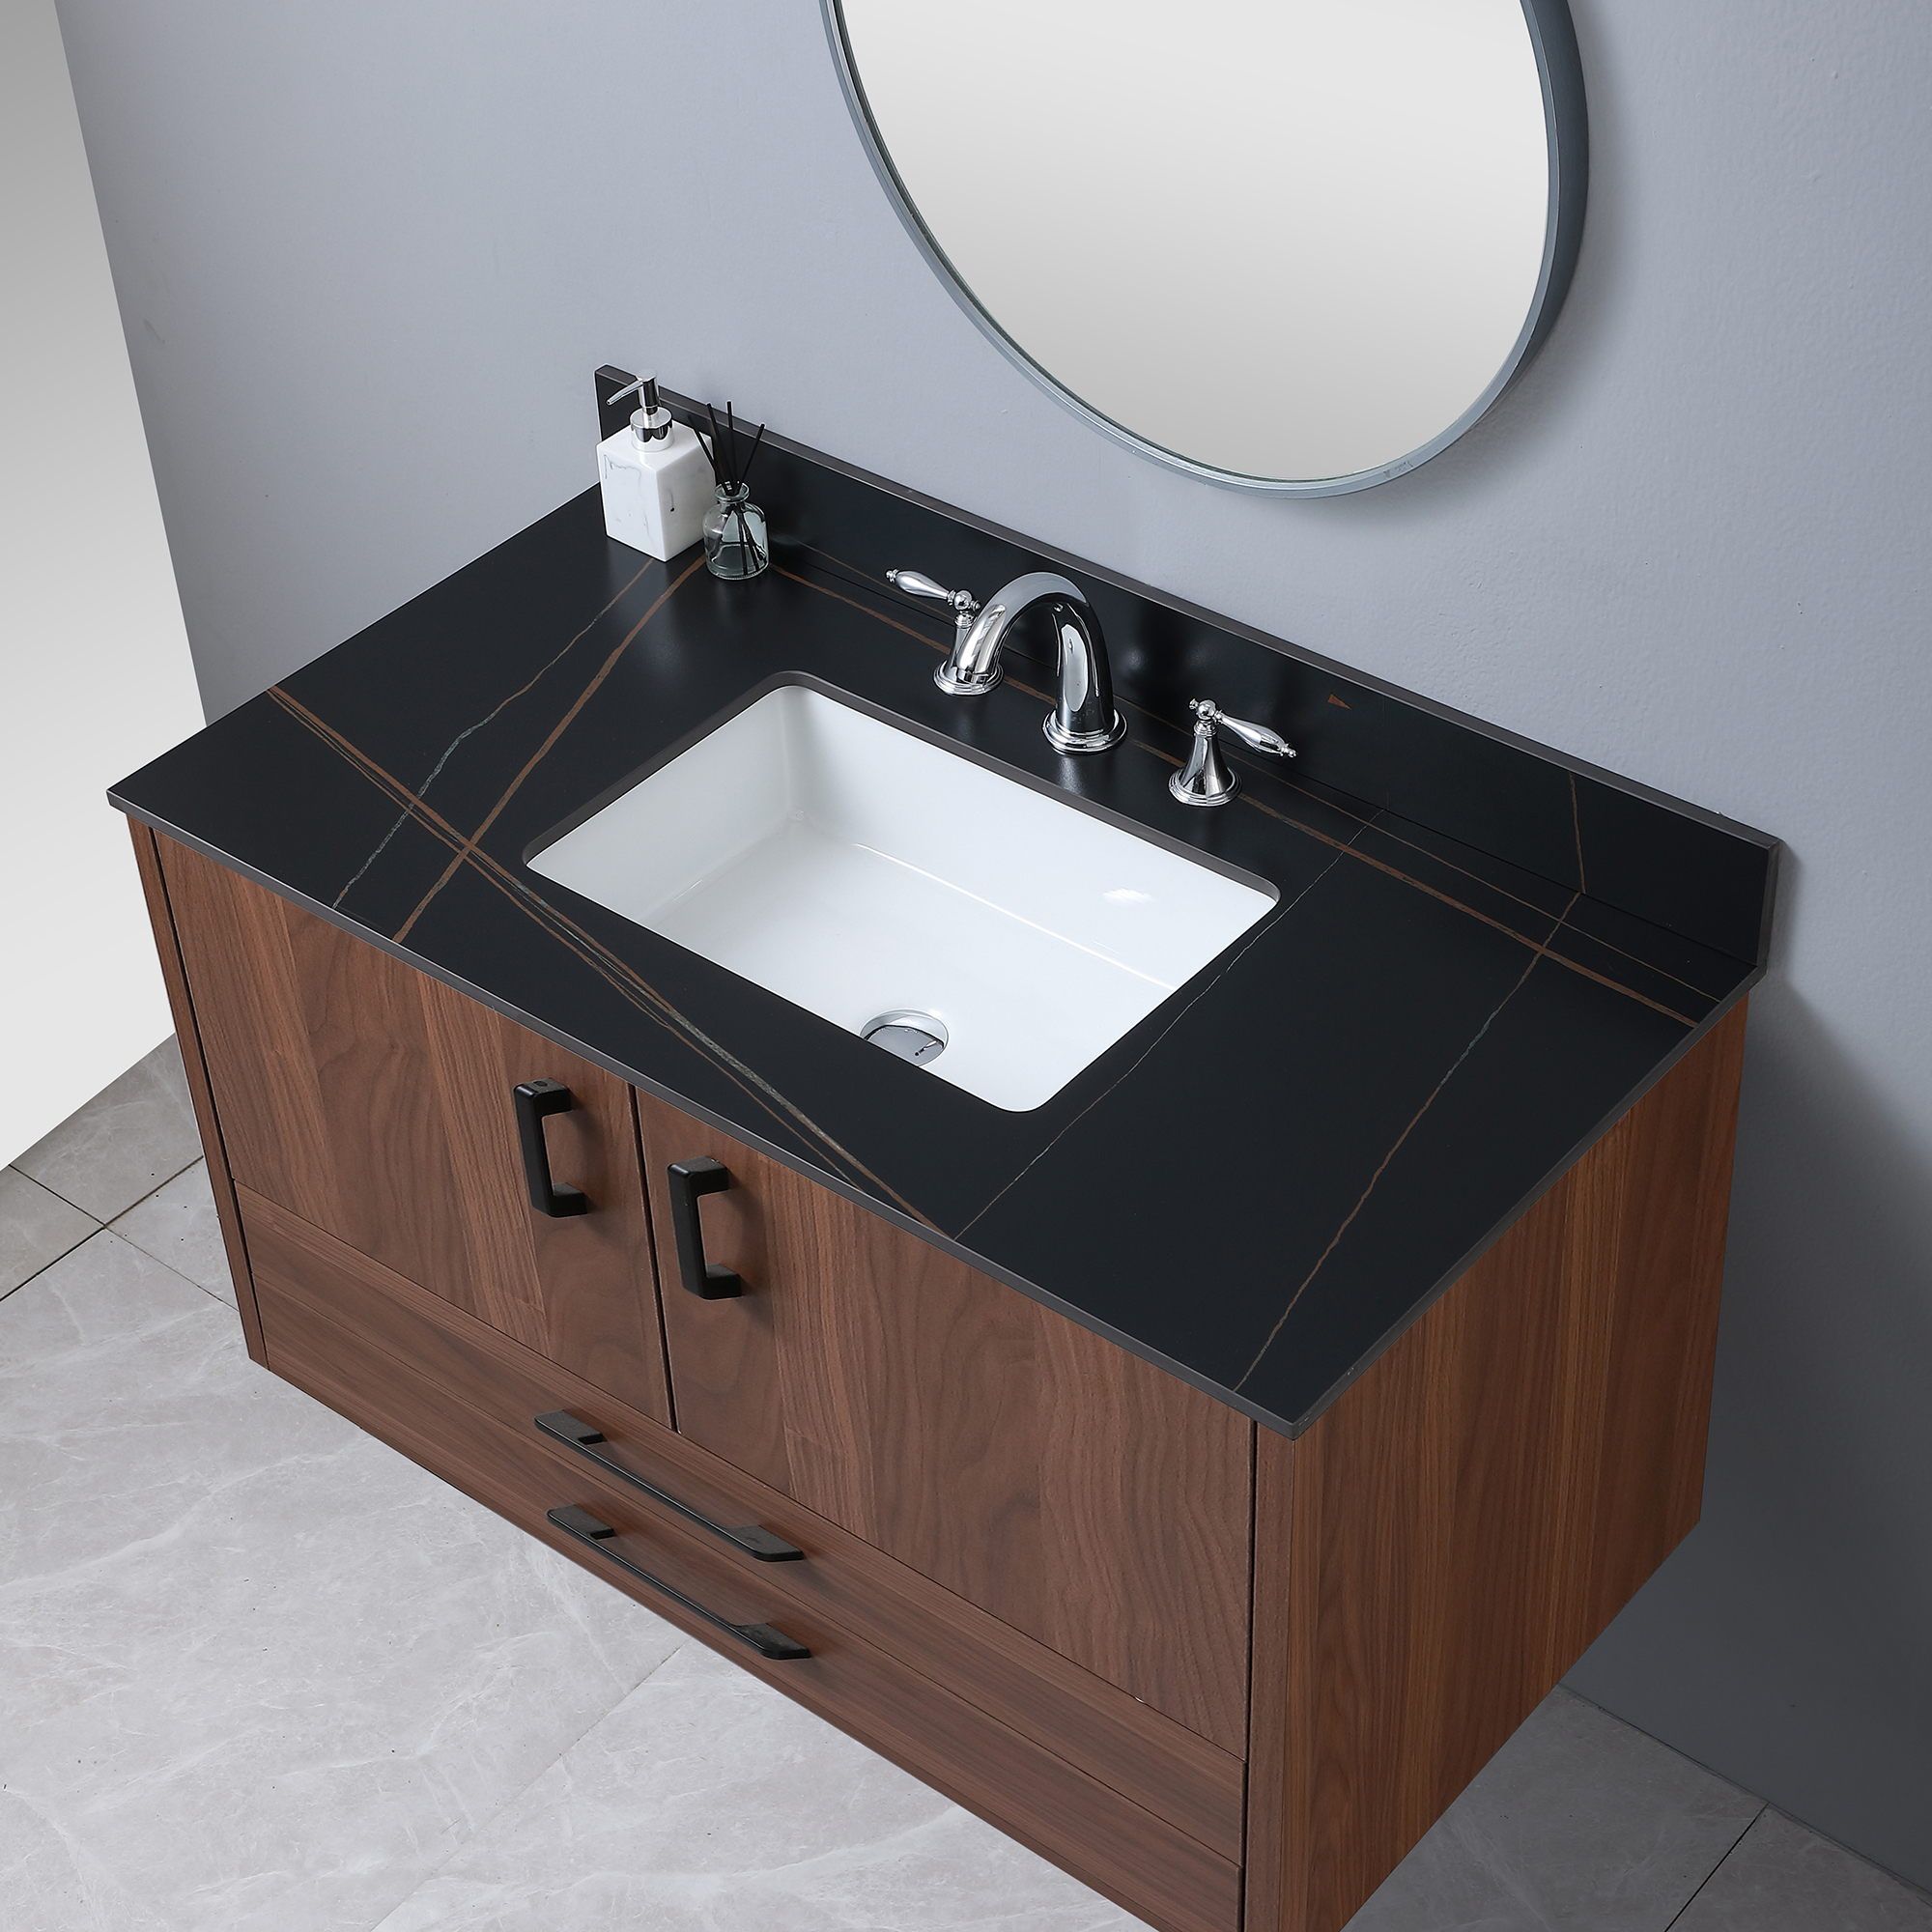 Montary 43" Sintered Stone Bathroom Vanity Top in Black Gold Color with Undermount Ceramic Sink and Three Faucet Hole with Backsplash